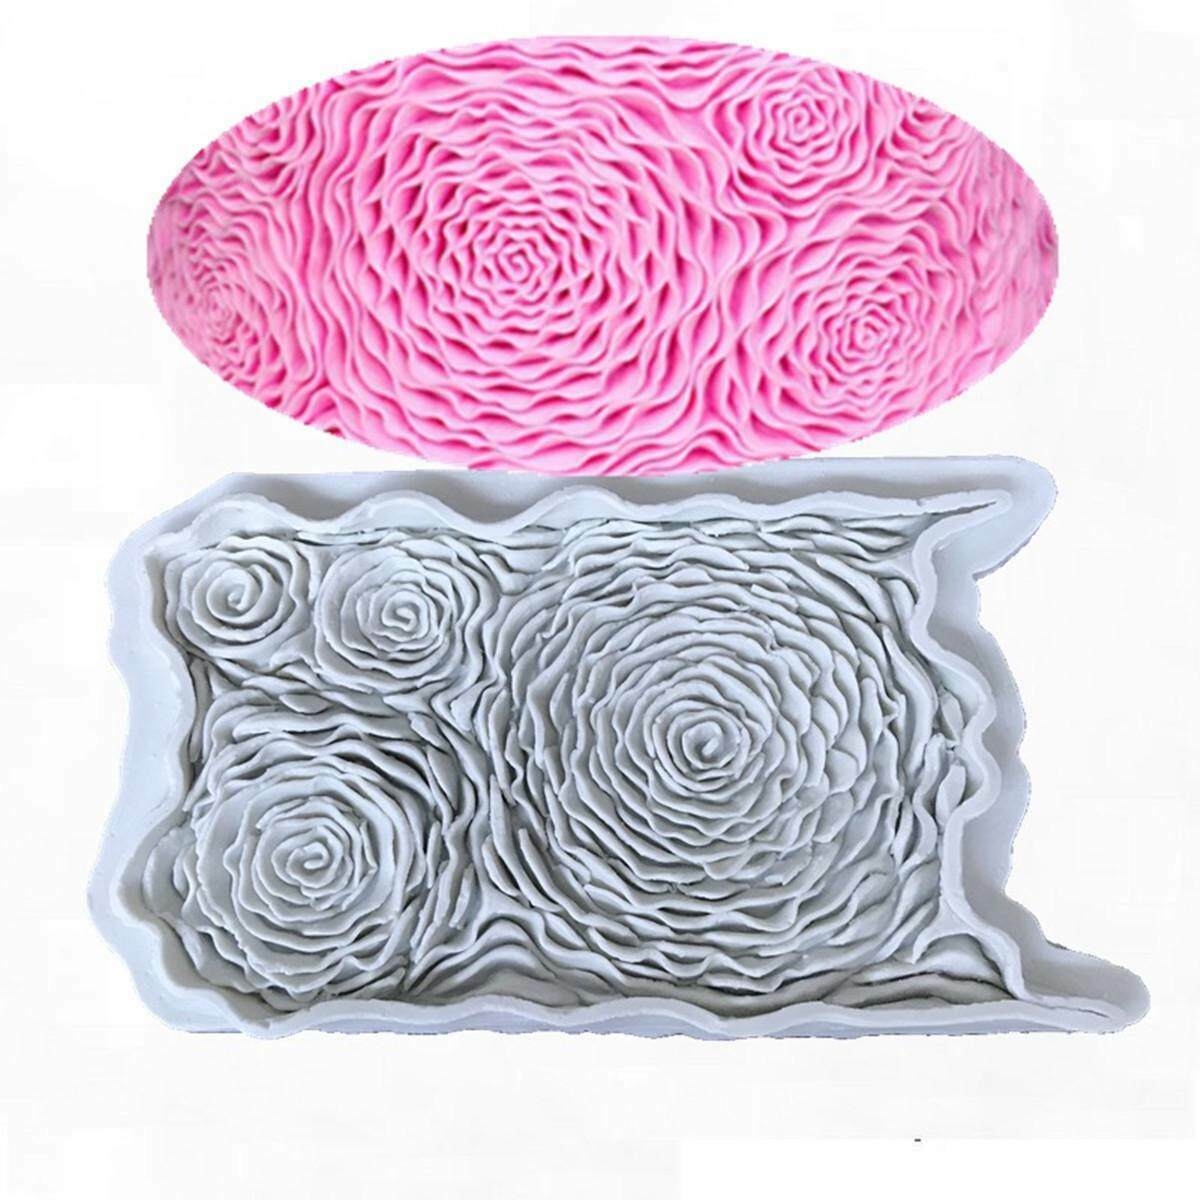 Marvelous Molds Rosette Ruffle Simpress Silicone Mold | Cake Decorating with